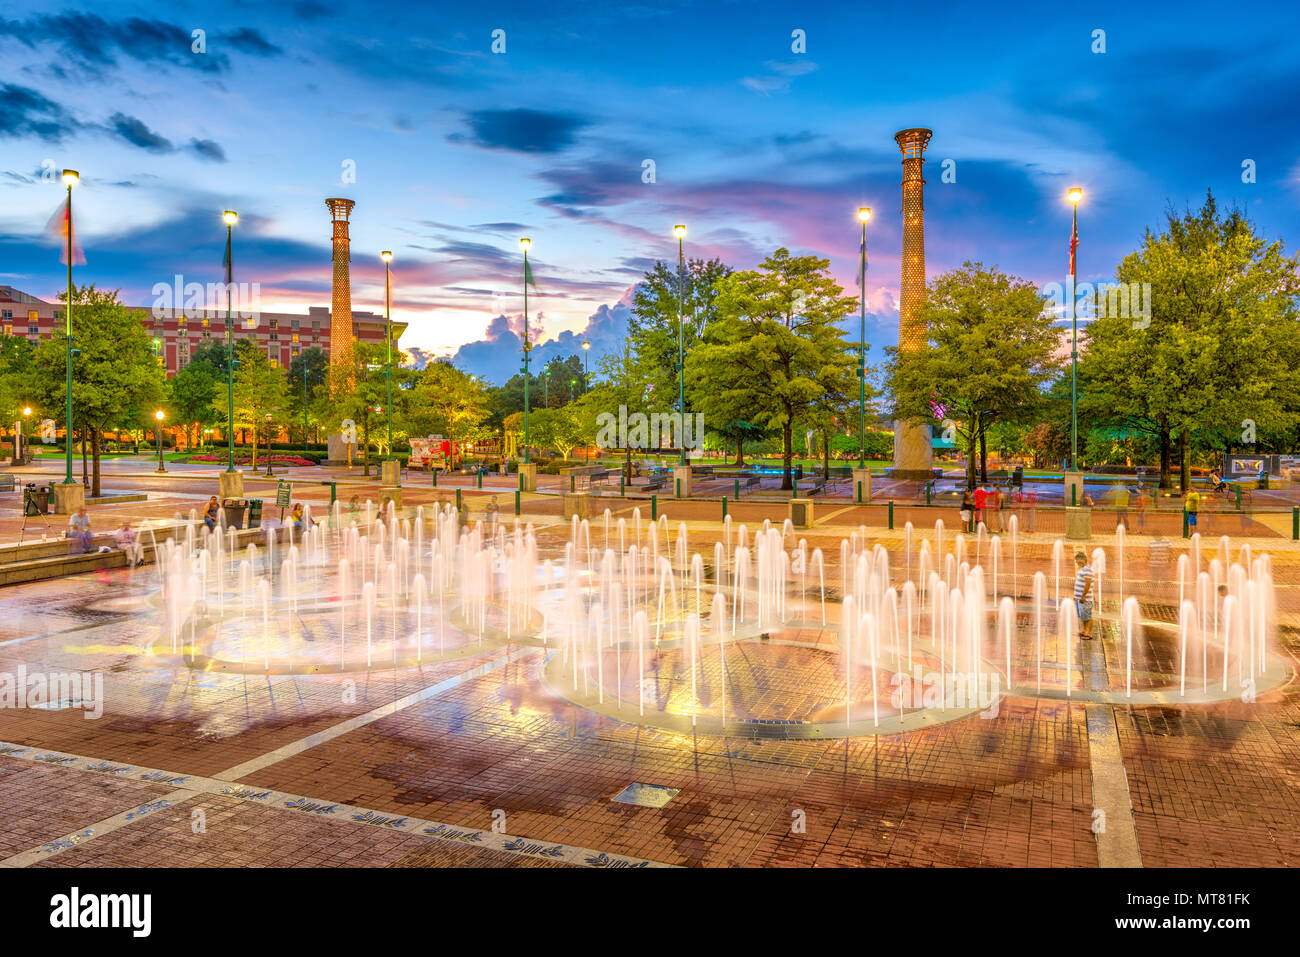 ATLANTA, GEORGIA - AUGUST 21, 2016: Visitors play in Centennial Olympic Park's landmark fountains. The Park was built for the 1996 Summer Olympics and Stock Photo